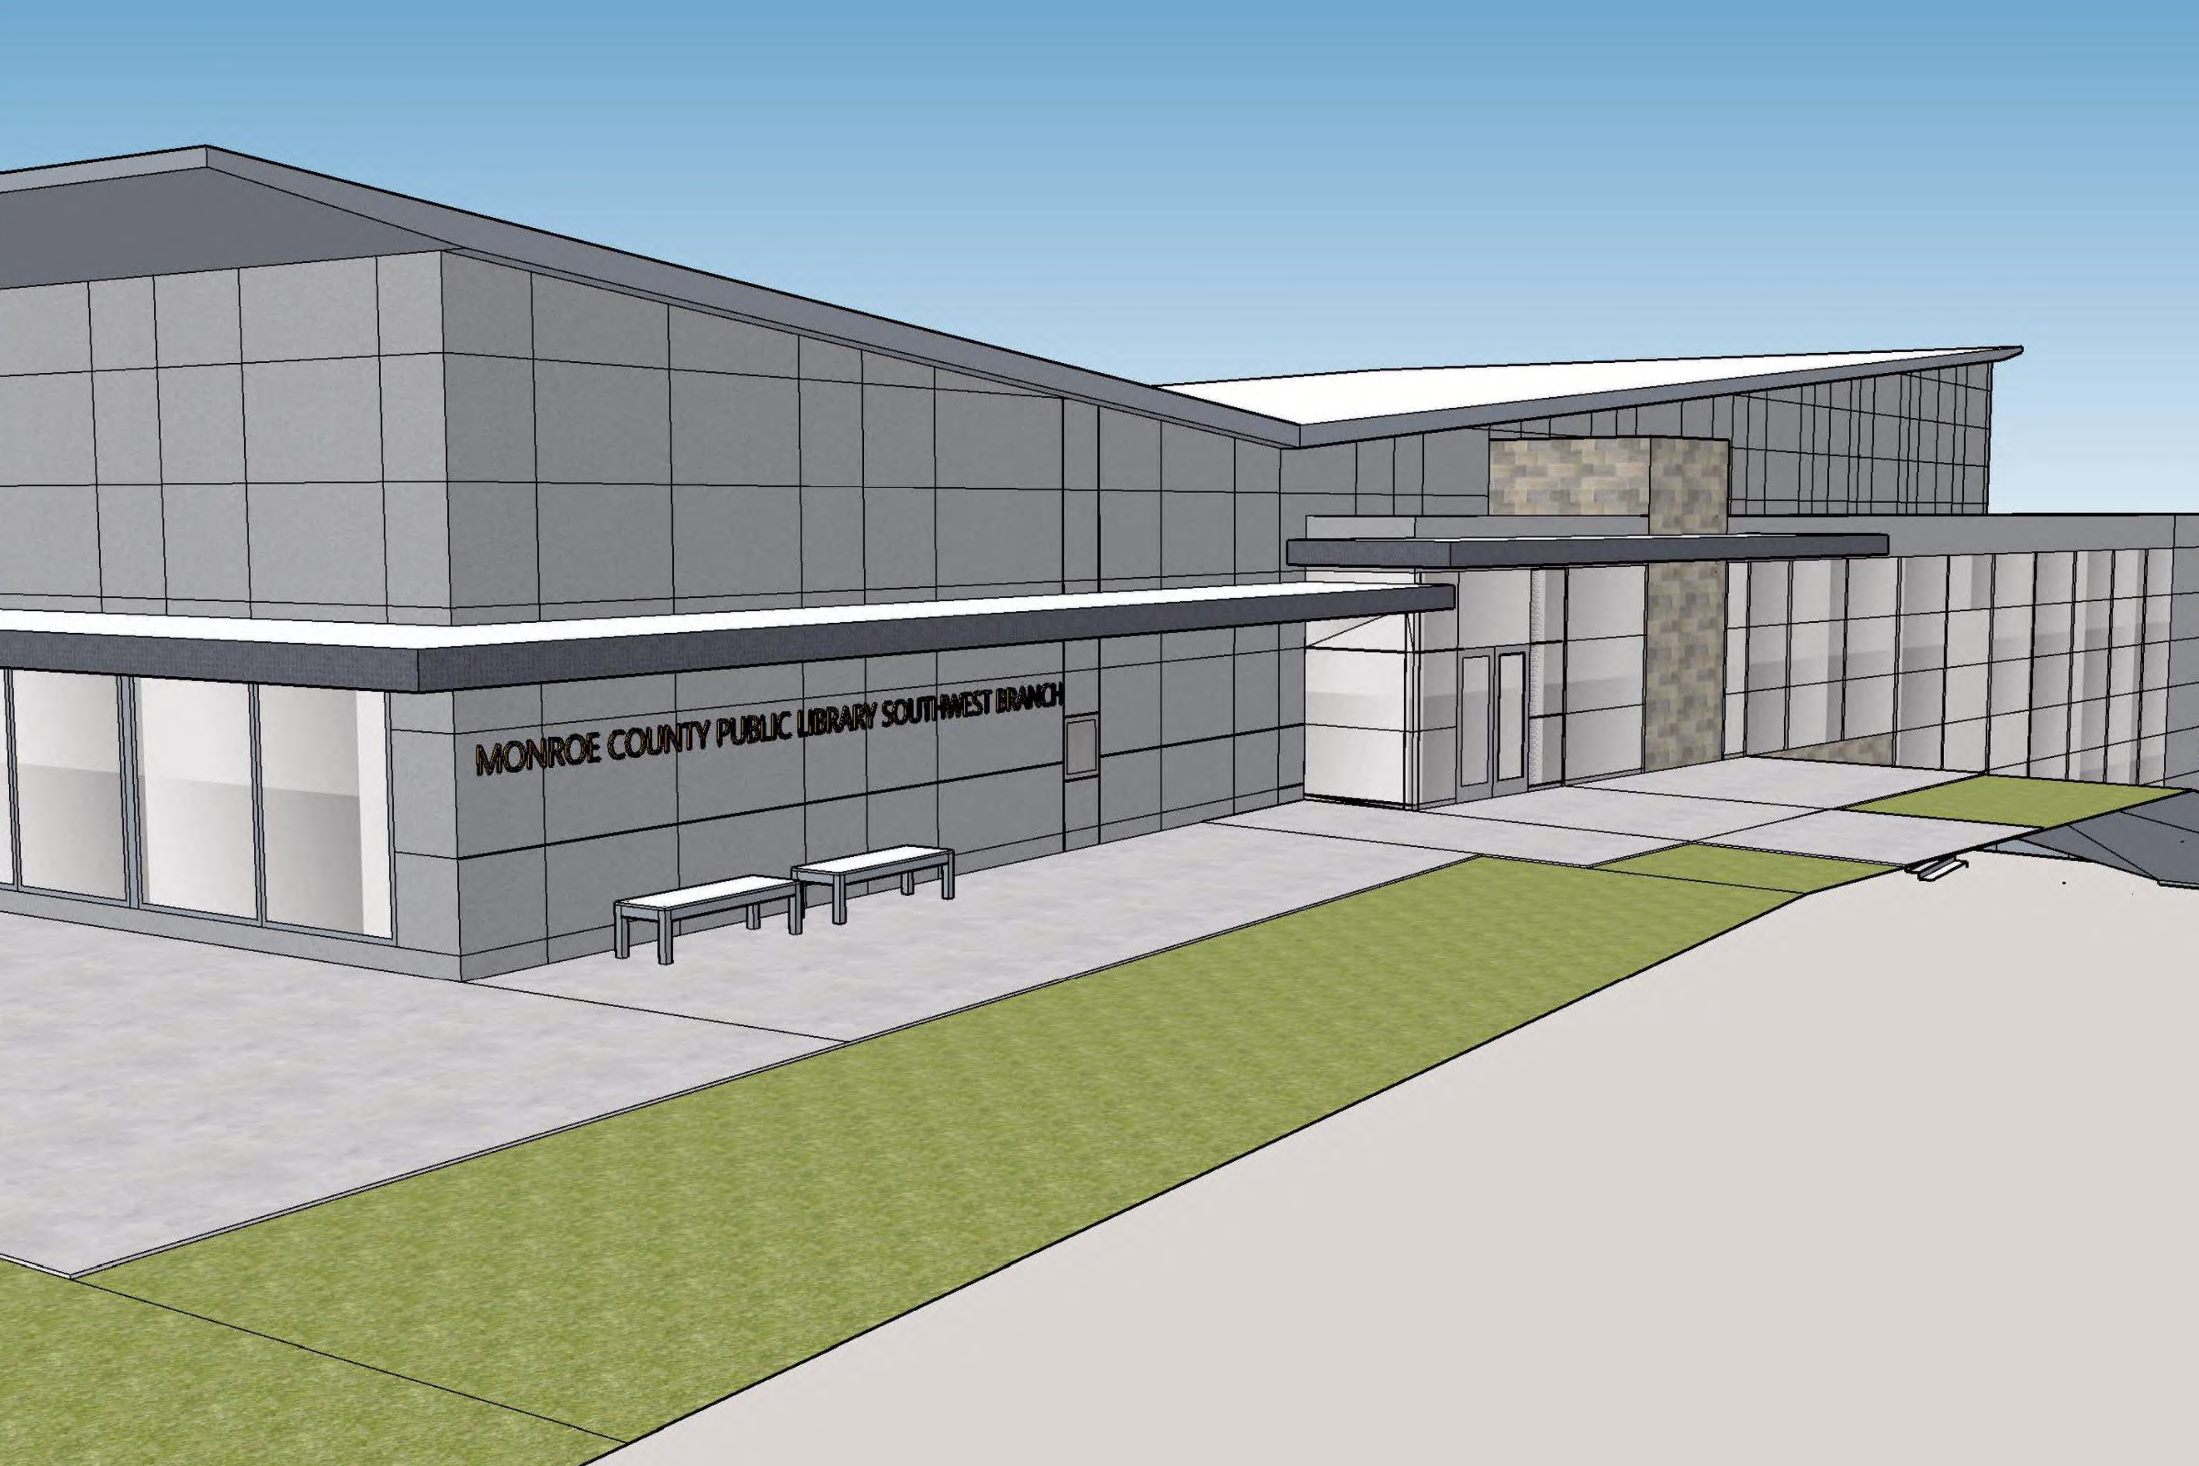 New Monroe County Public Library rendering